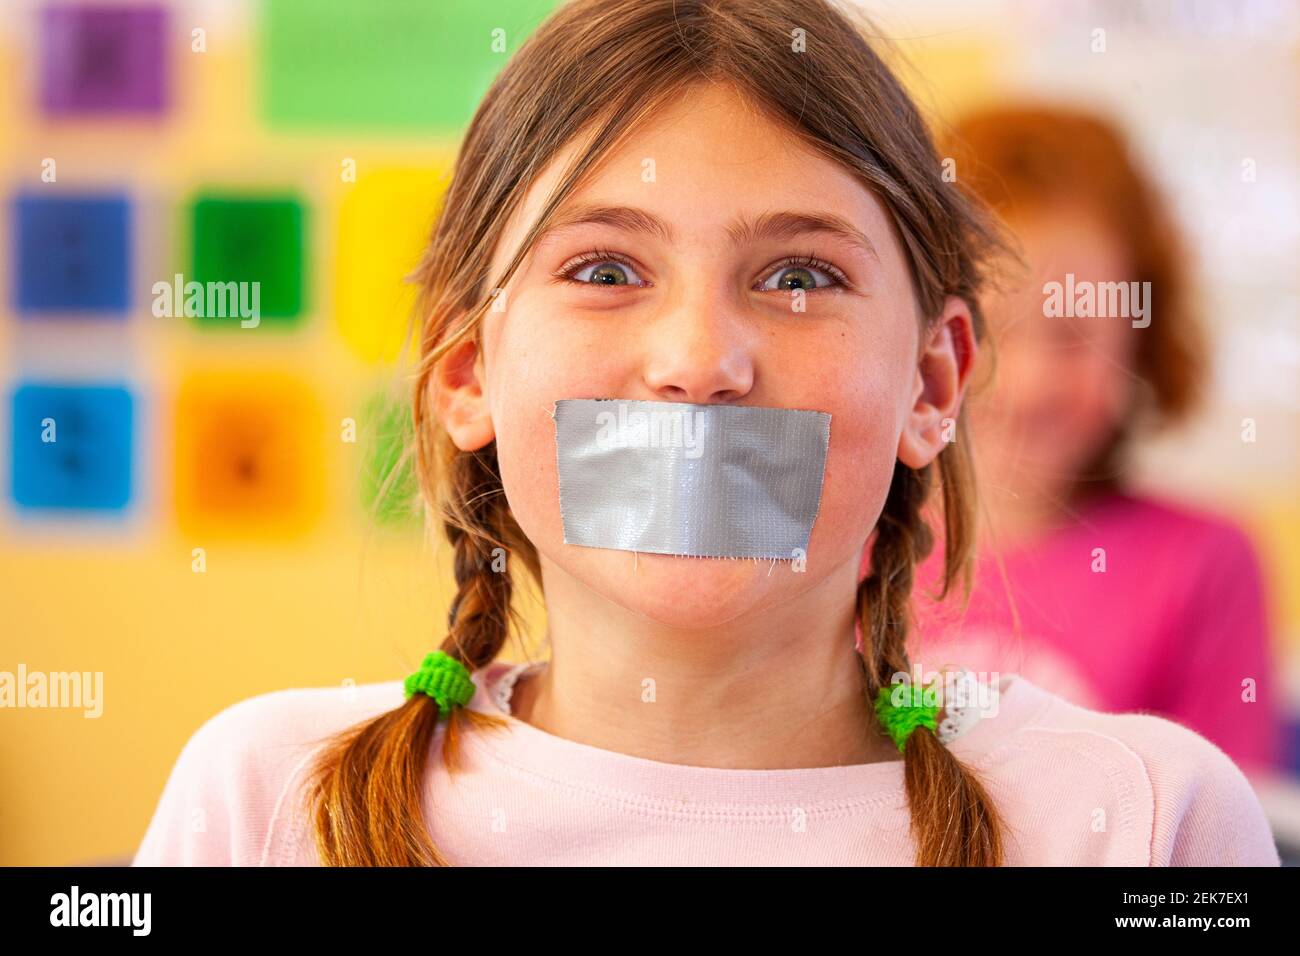 Young child with their mouth taped up in a school classroom Stock Photo